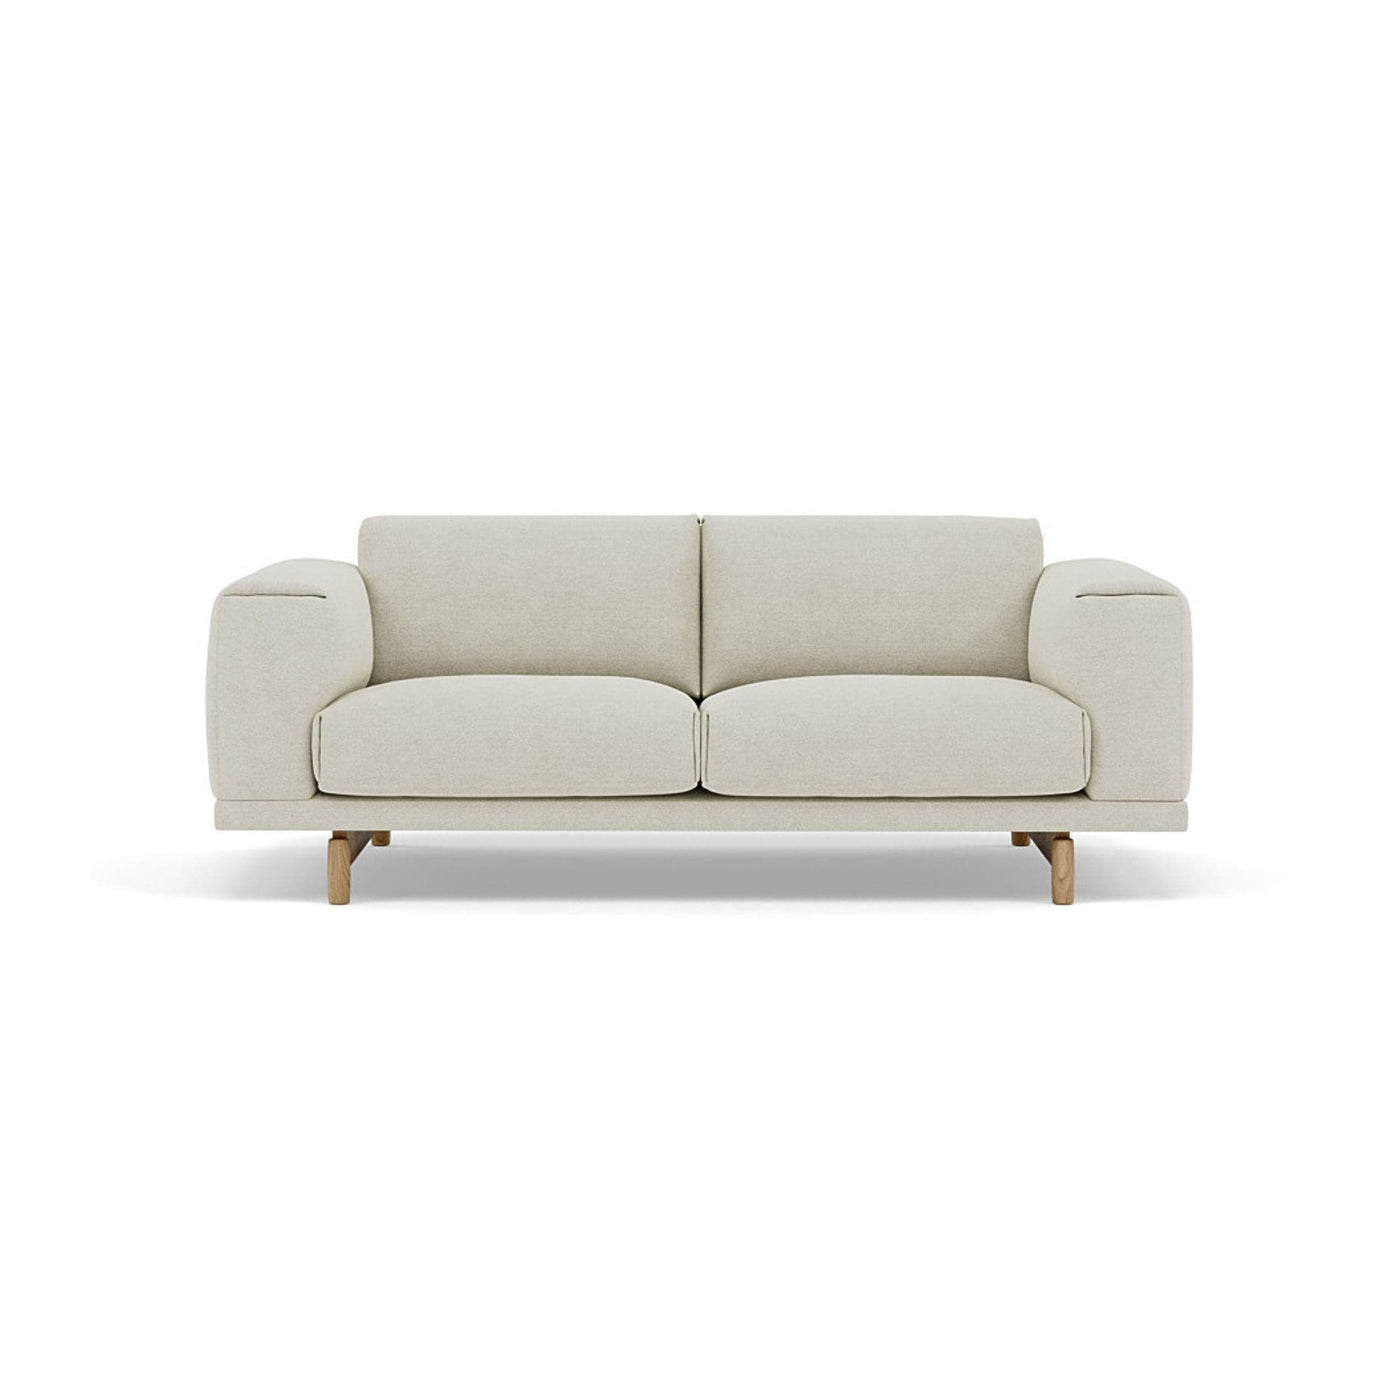 Muuto Rest Sofa 2 seater, available made to order from someday designs. #colour_fiord-101